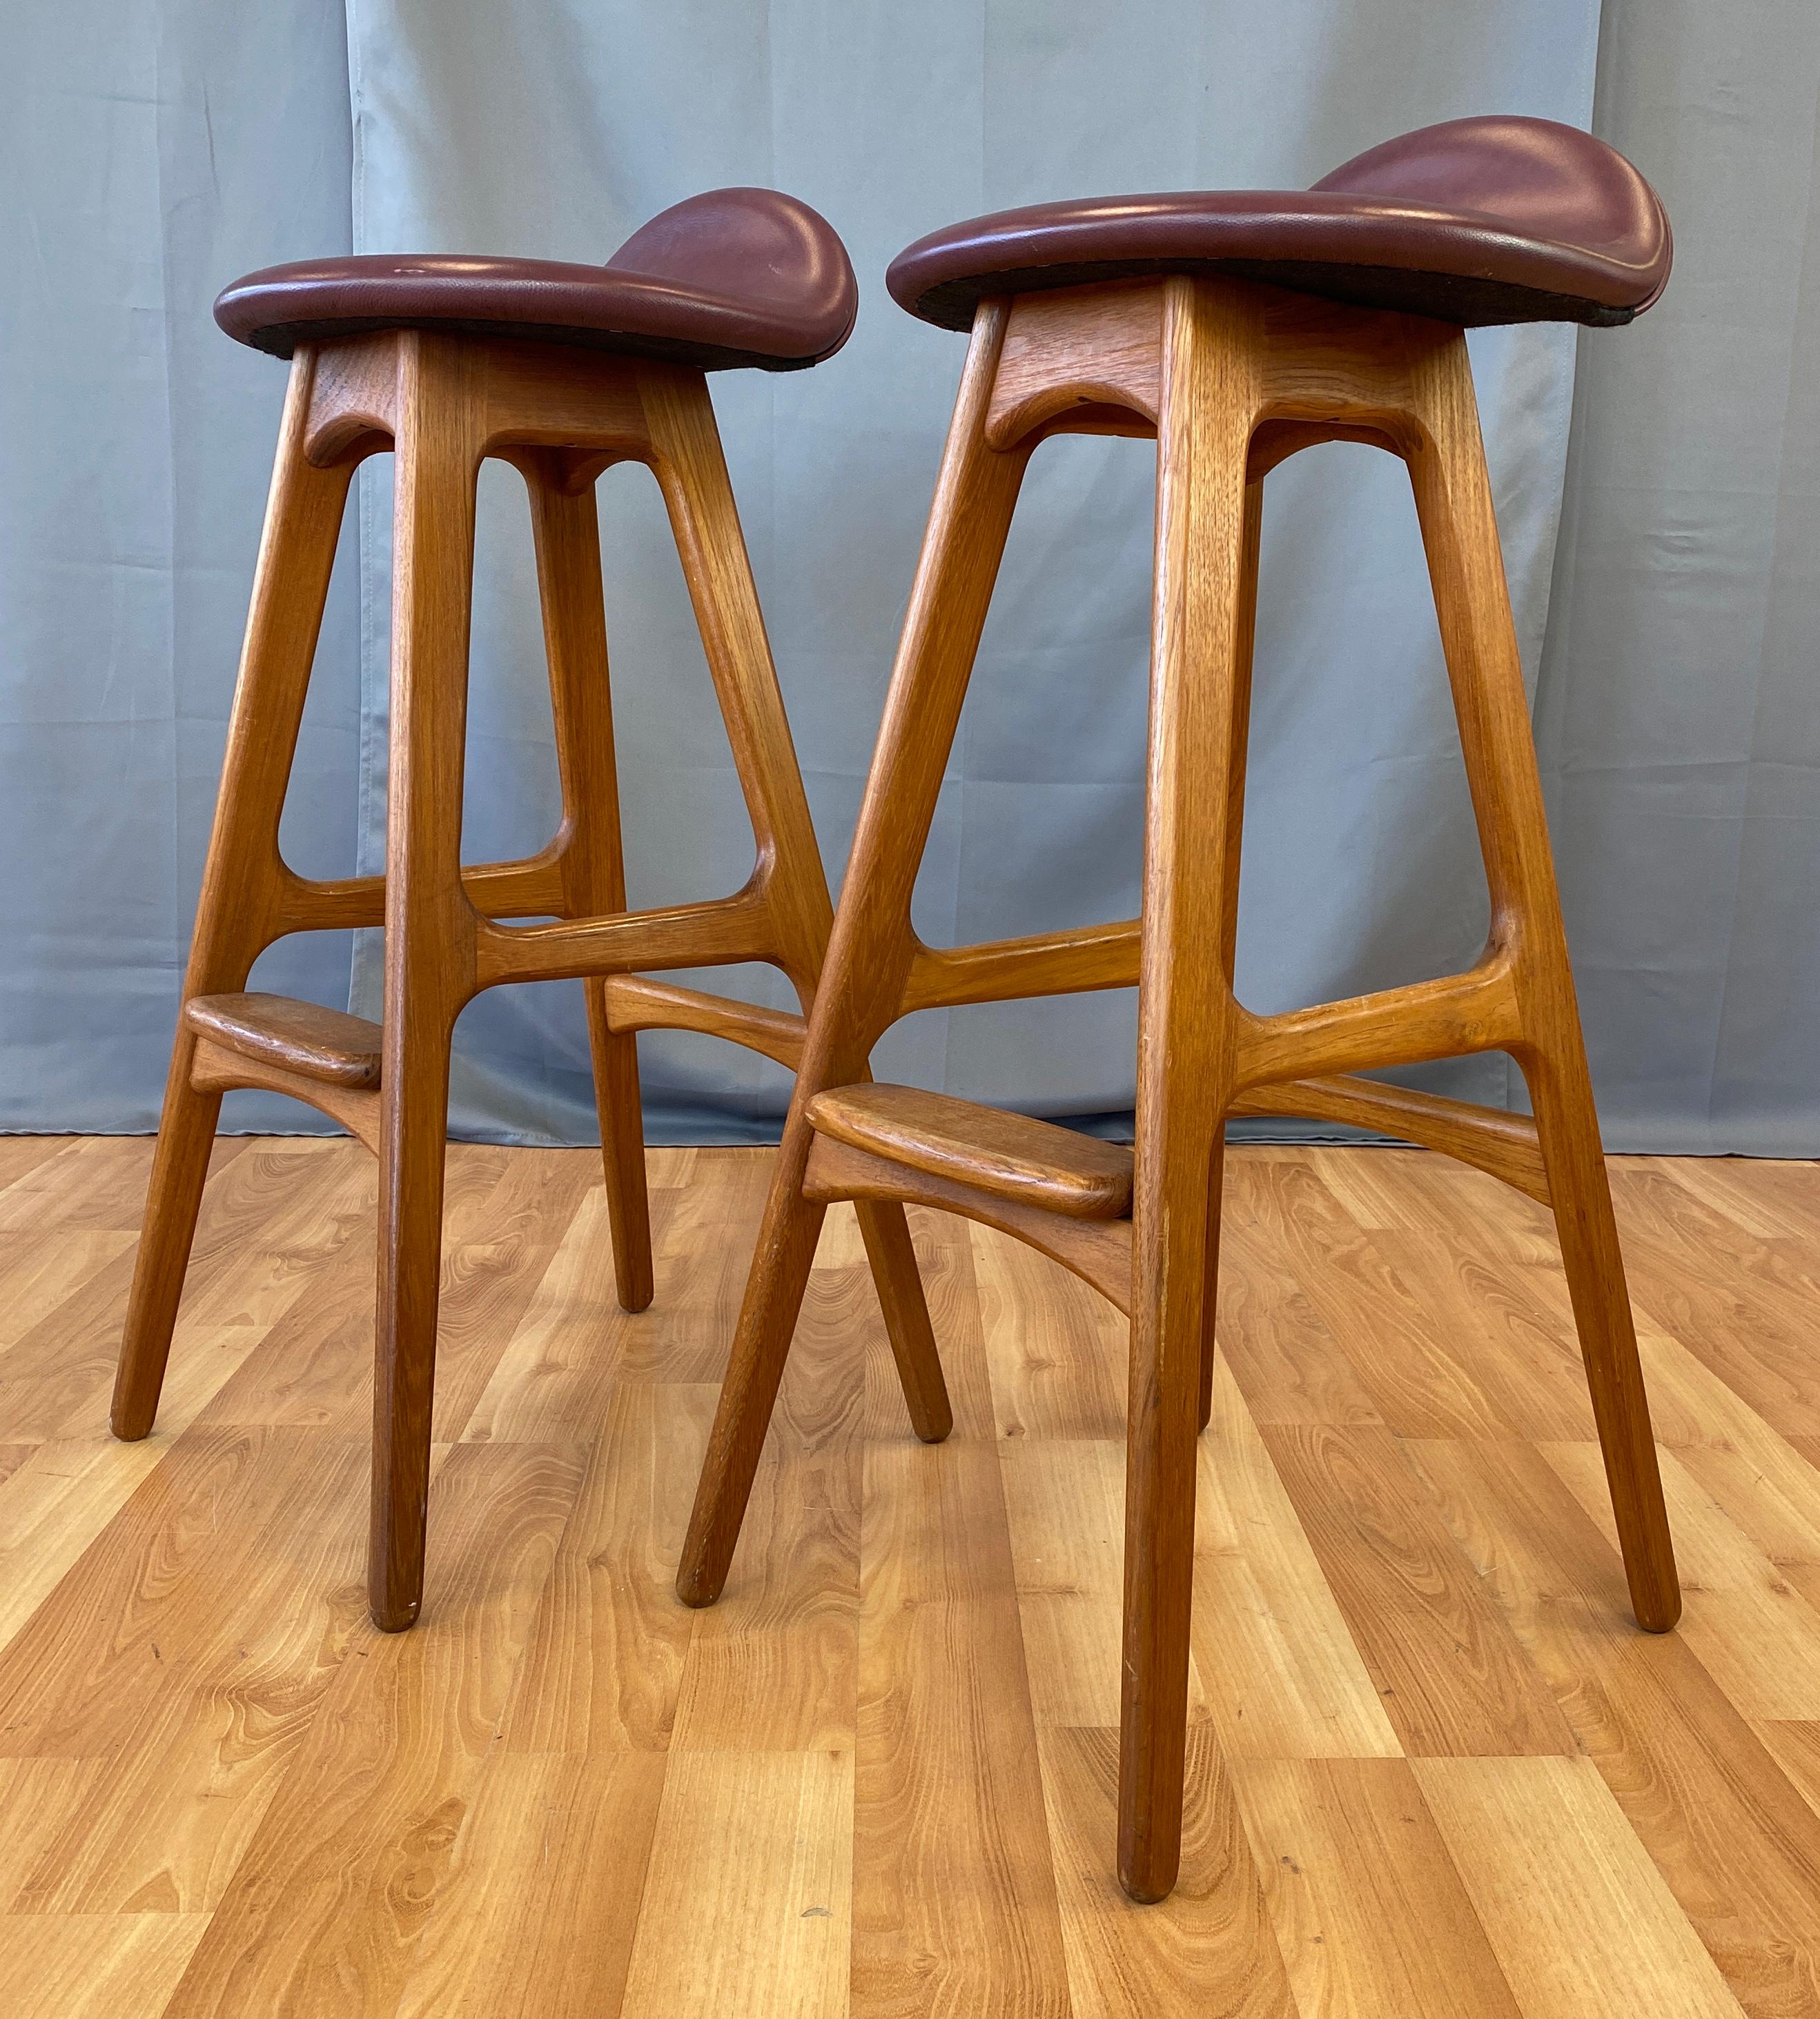 A pair of model OD-61 teak bar stools by Erik Buch for Oddense Maskinsnedkeri. 

Iconic Danish modern design with architectural lines in smoothly sculpted solid teak. Sleek seat retains Burgundy leather custom upholstery.